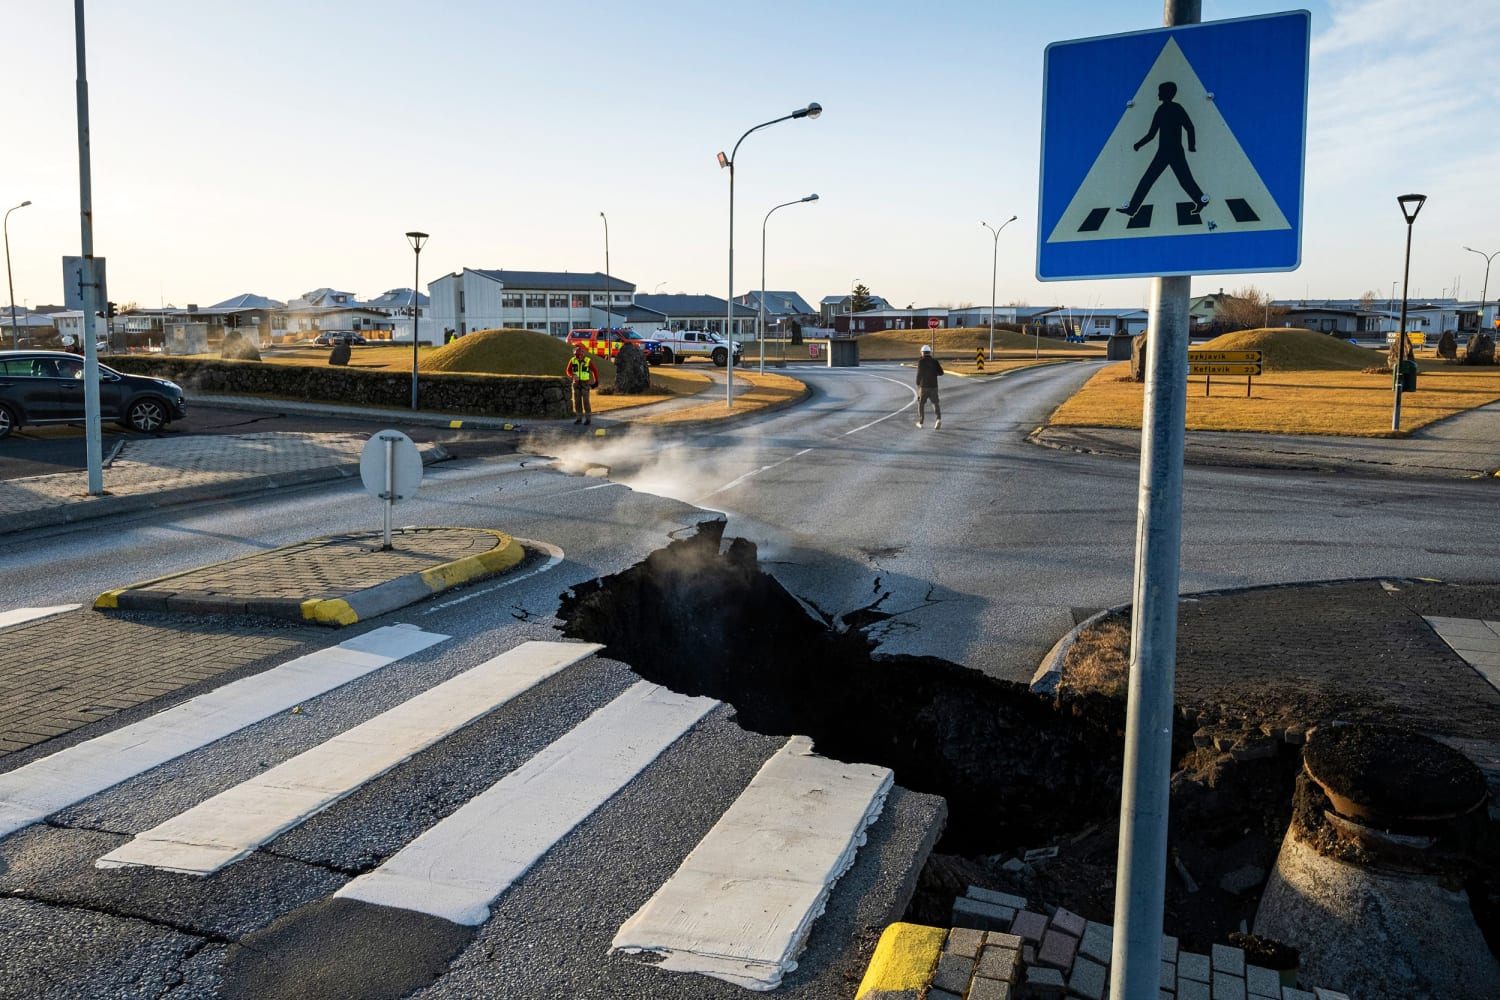 Iceland residents evacuate the city as officials warn of an imminent volcanic eruption